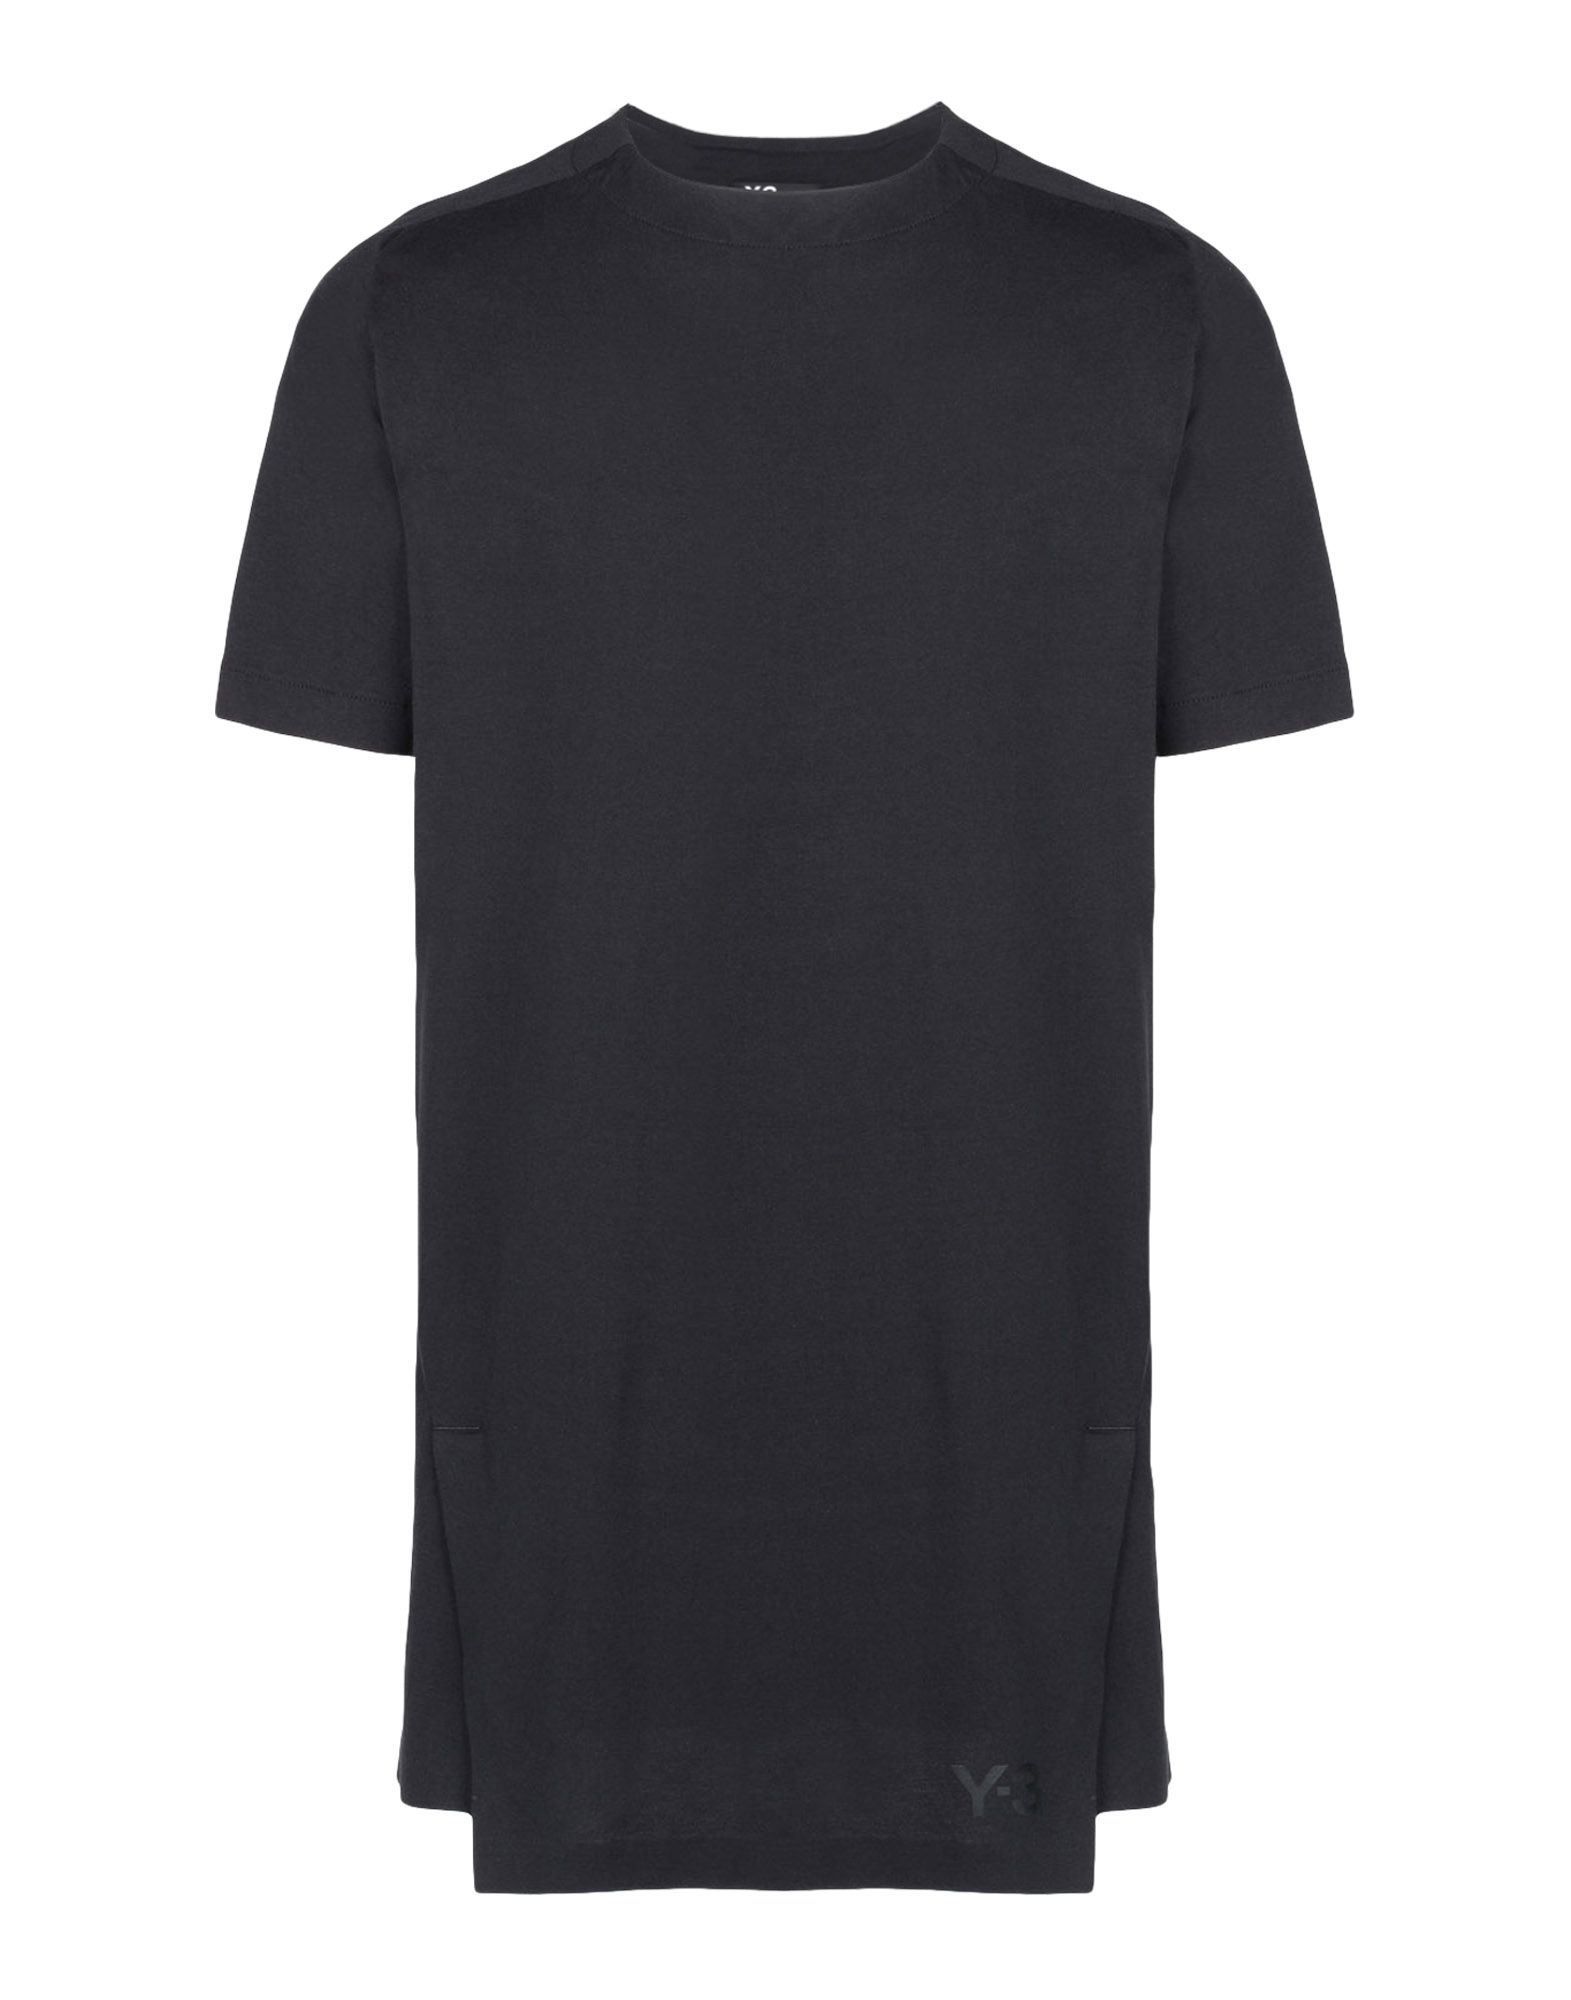 Y 3 PLANET TEE BLACK for Women | Adidas Y-3 Official Store